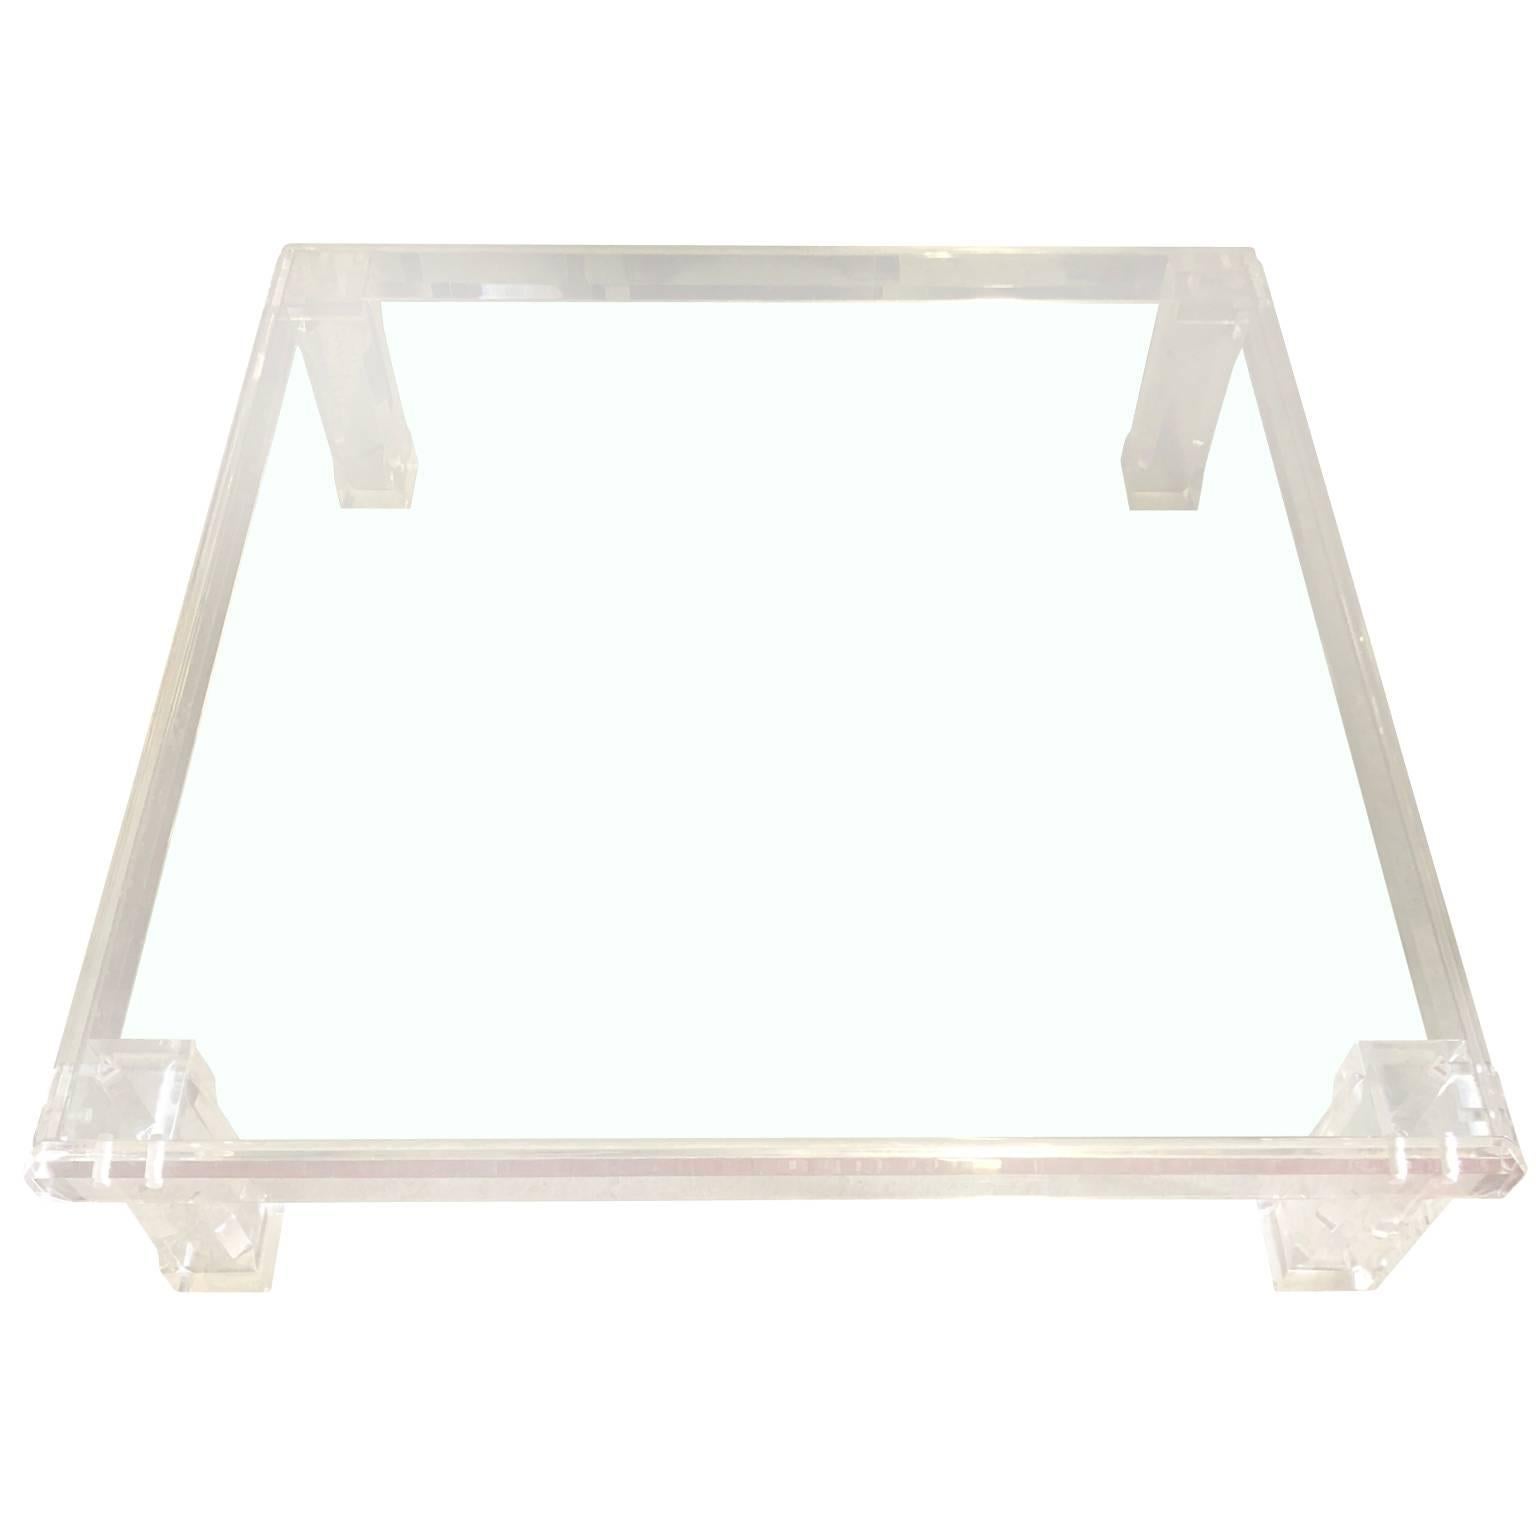 American Large Square Lucite Cocktail Table